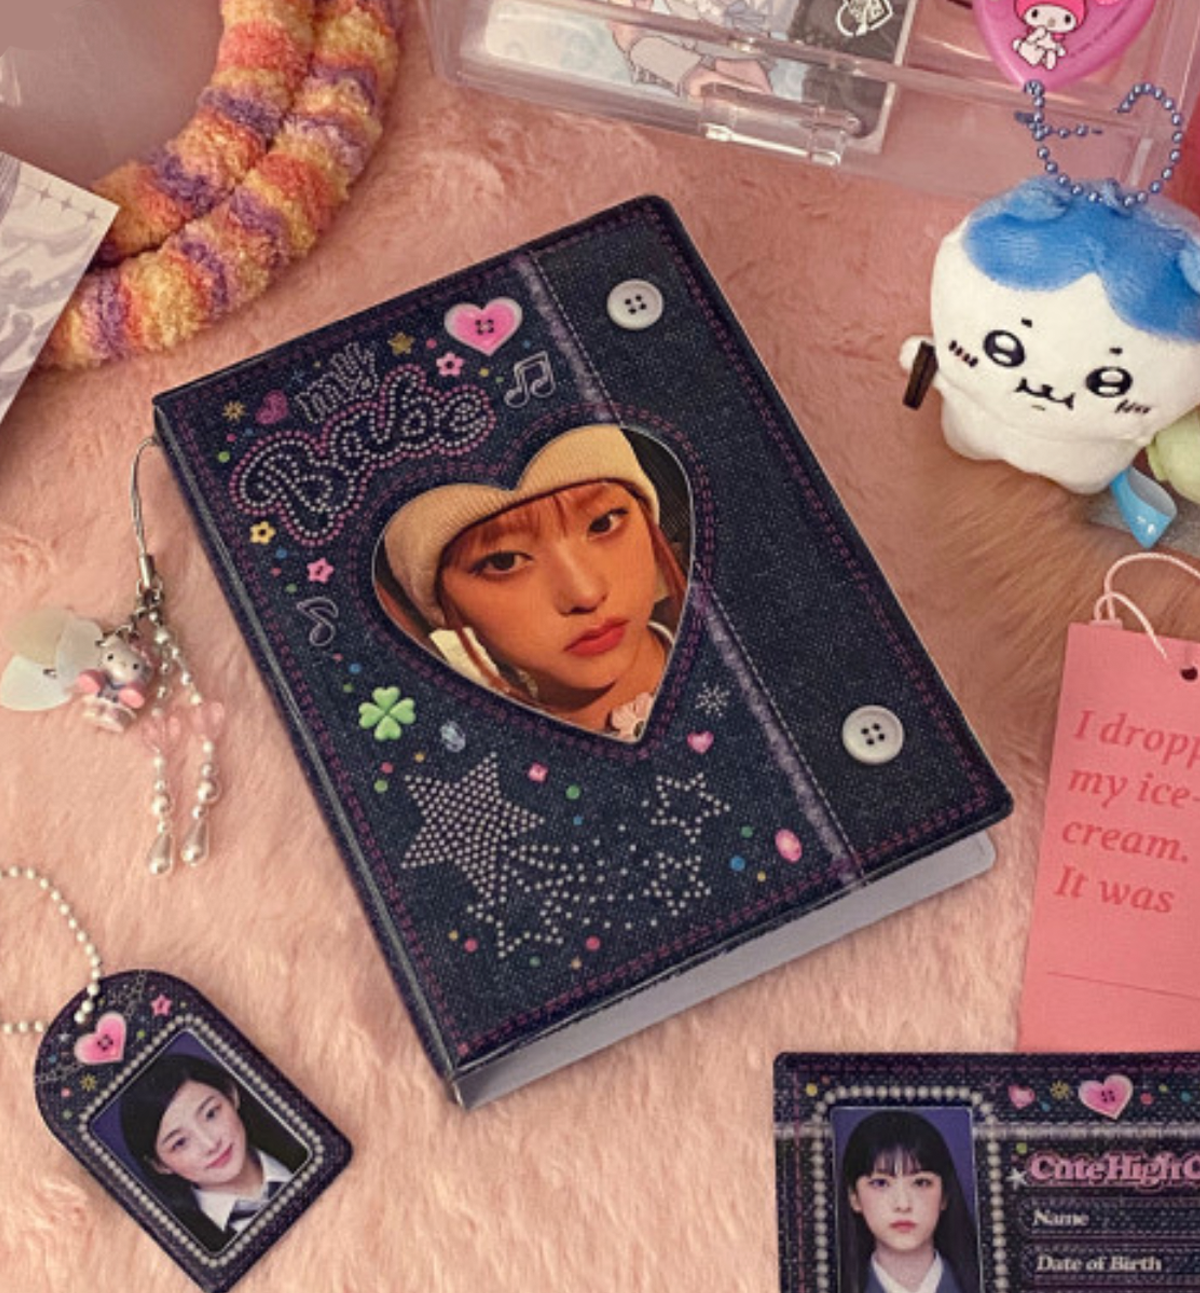 Aesthetic Simple Lovely Korean Hard Cover Photo Album Collect Book for kpop  photocards, polcos, polaroids, business cards, trading cards, couples - 40